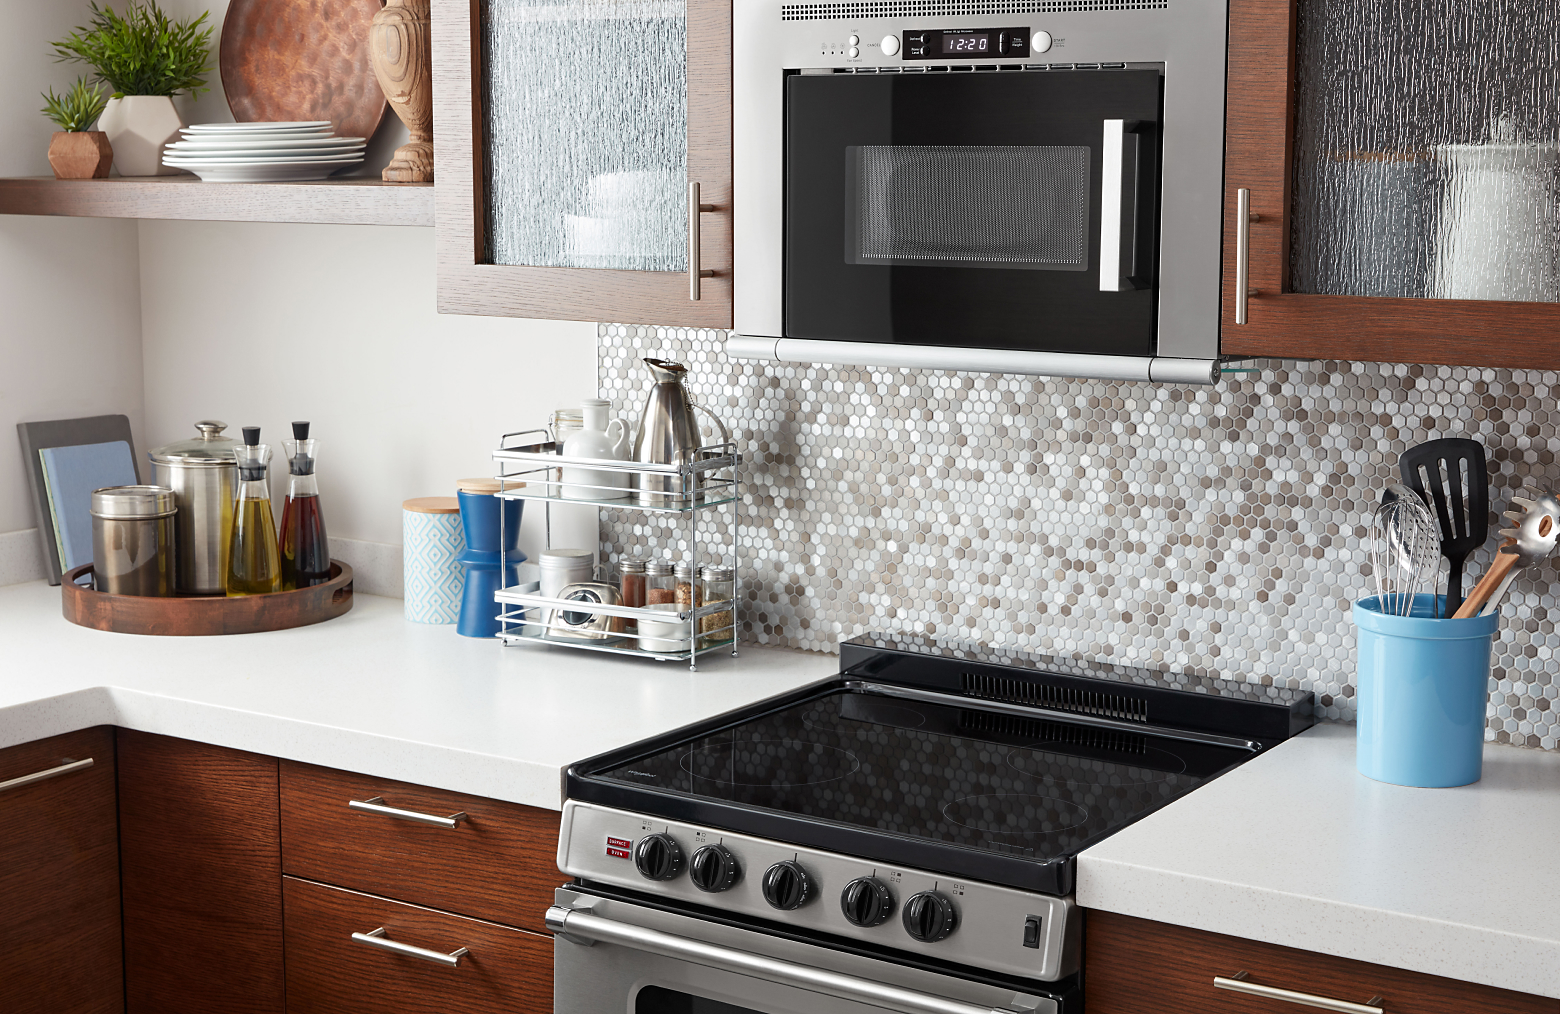 Small Appliance Trends - Spicing Up Kitchens with Color & Style   Countertop microwave, Countertop microwave oven, Small microwave